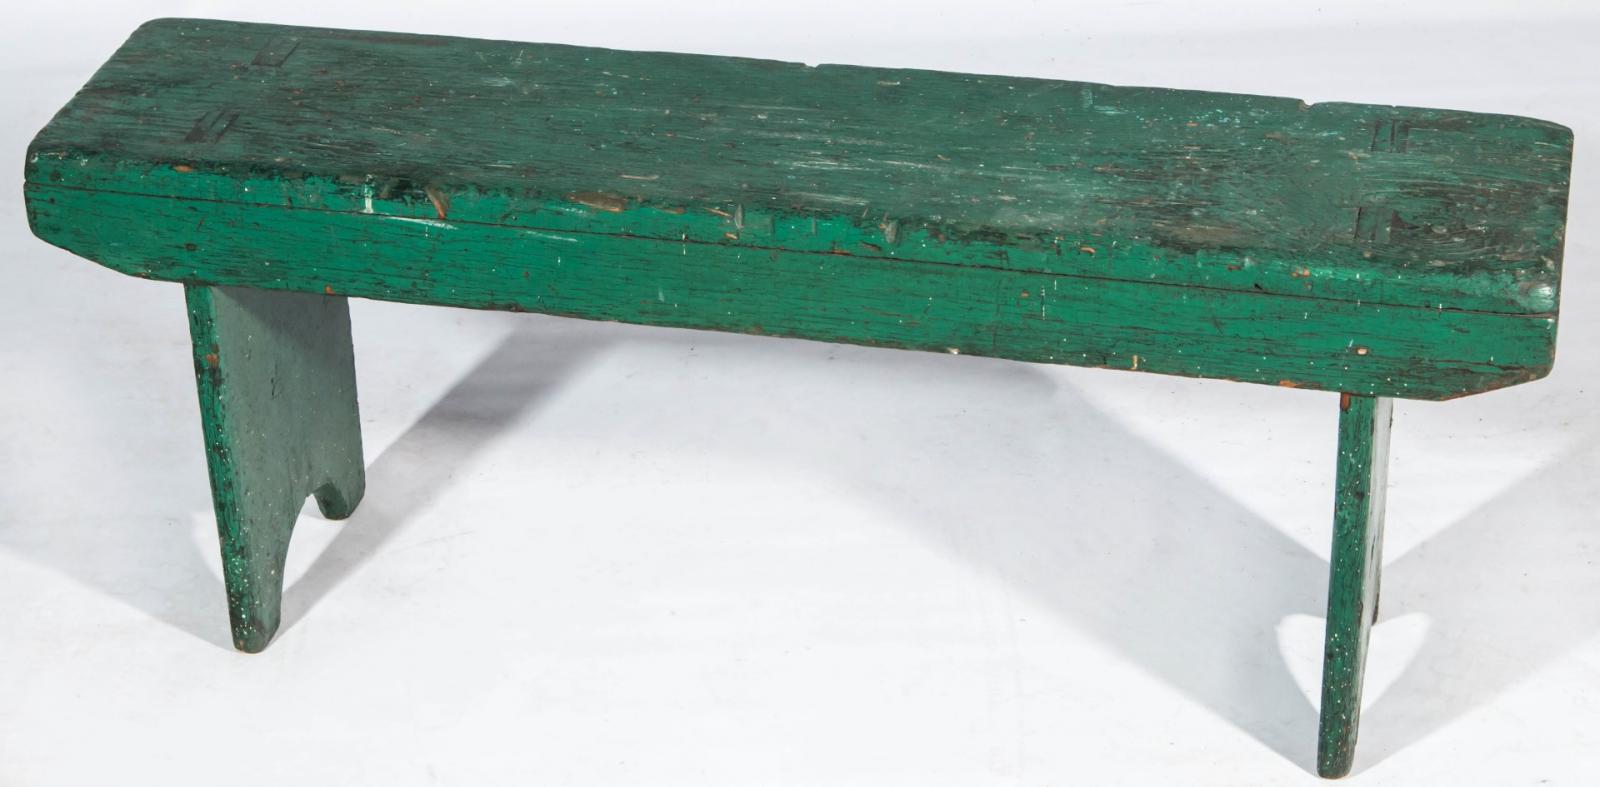 A CIRCA 1900 SHORT BENCH IN OLD GREEN PAINT